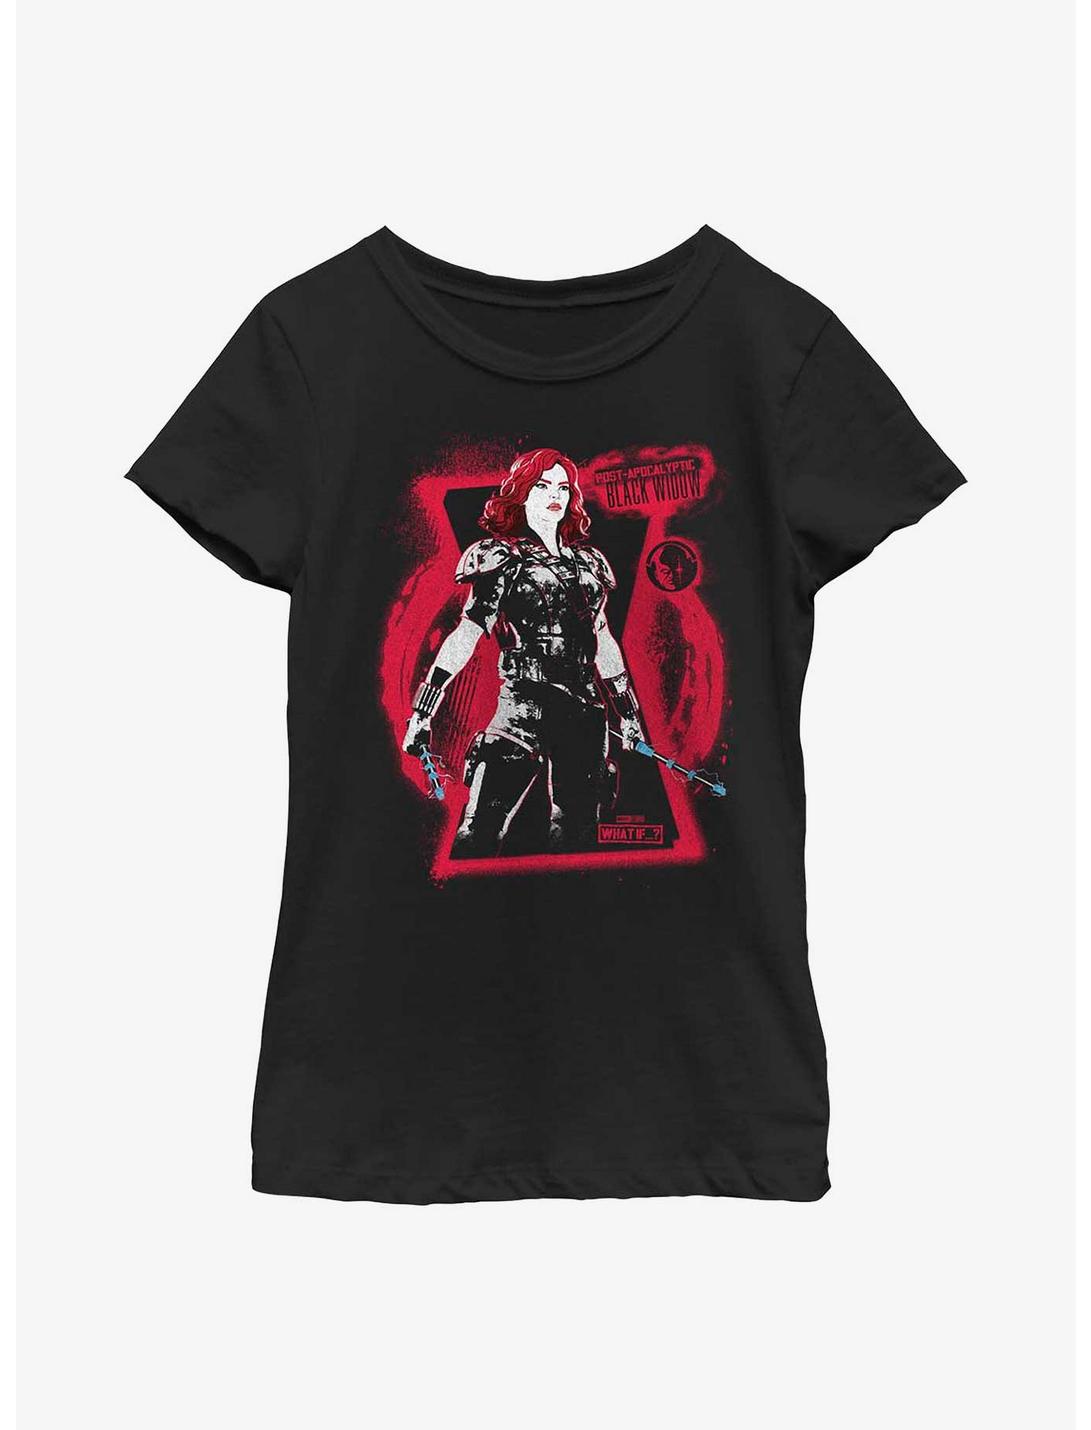 Marvel What If?? Black Widow Post Apocalypse Ready Youth Girls T-Shirt, BLACK, hi-res